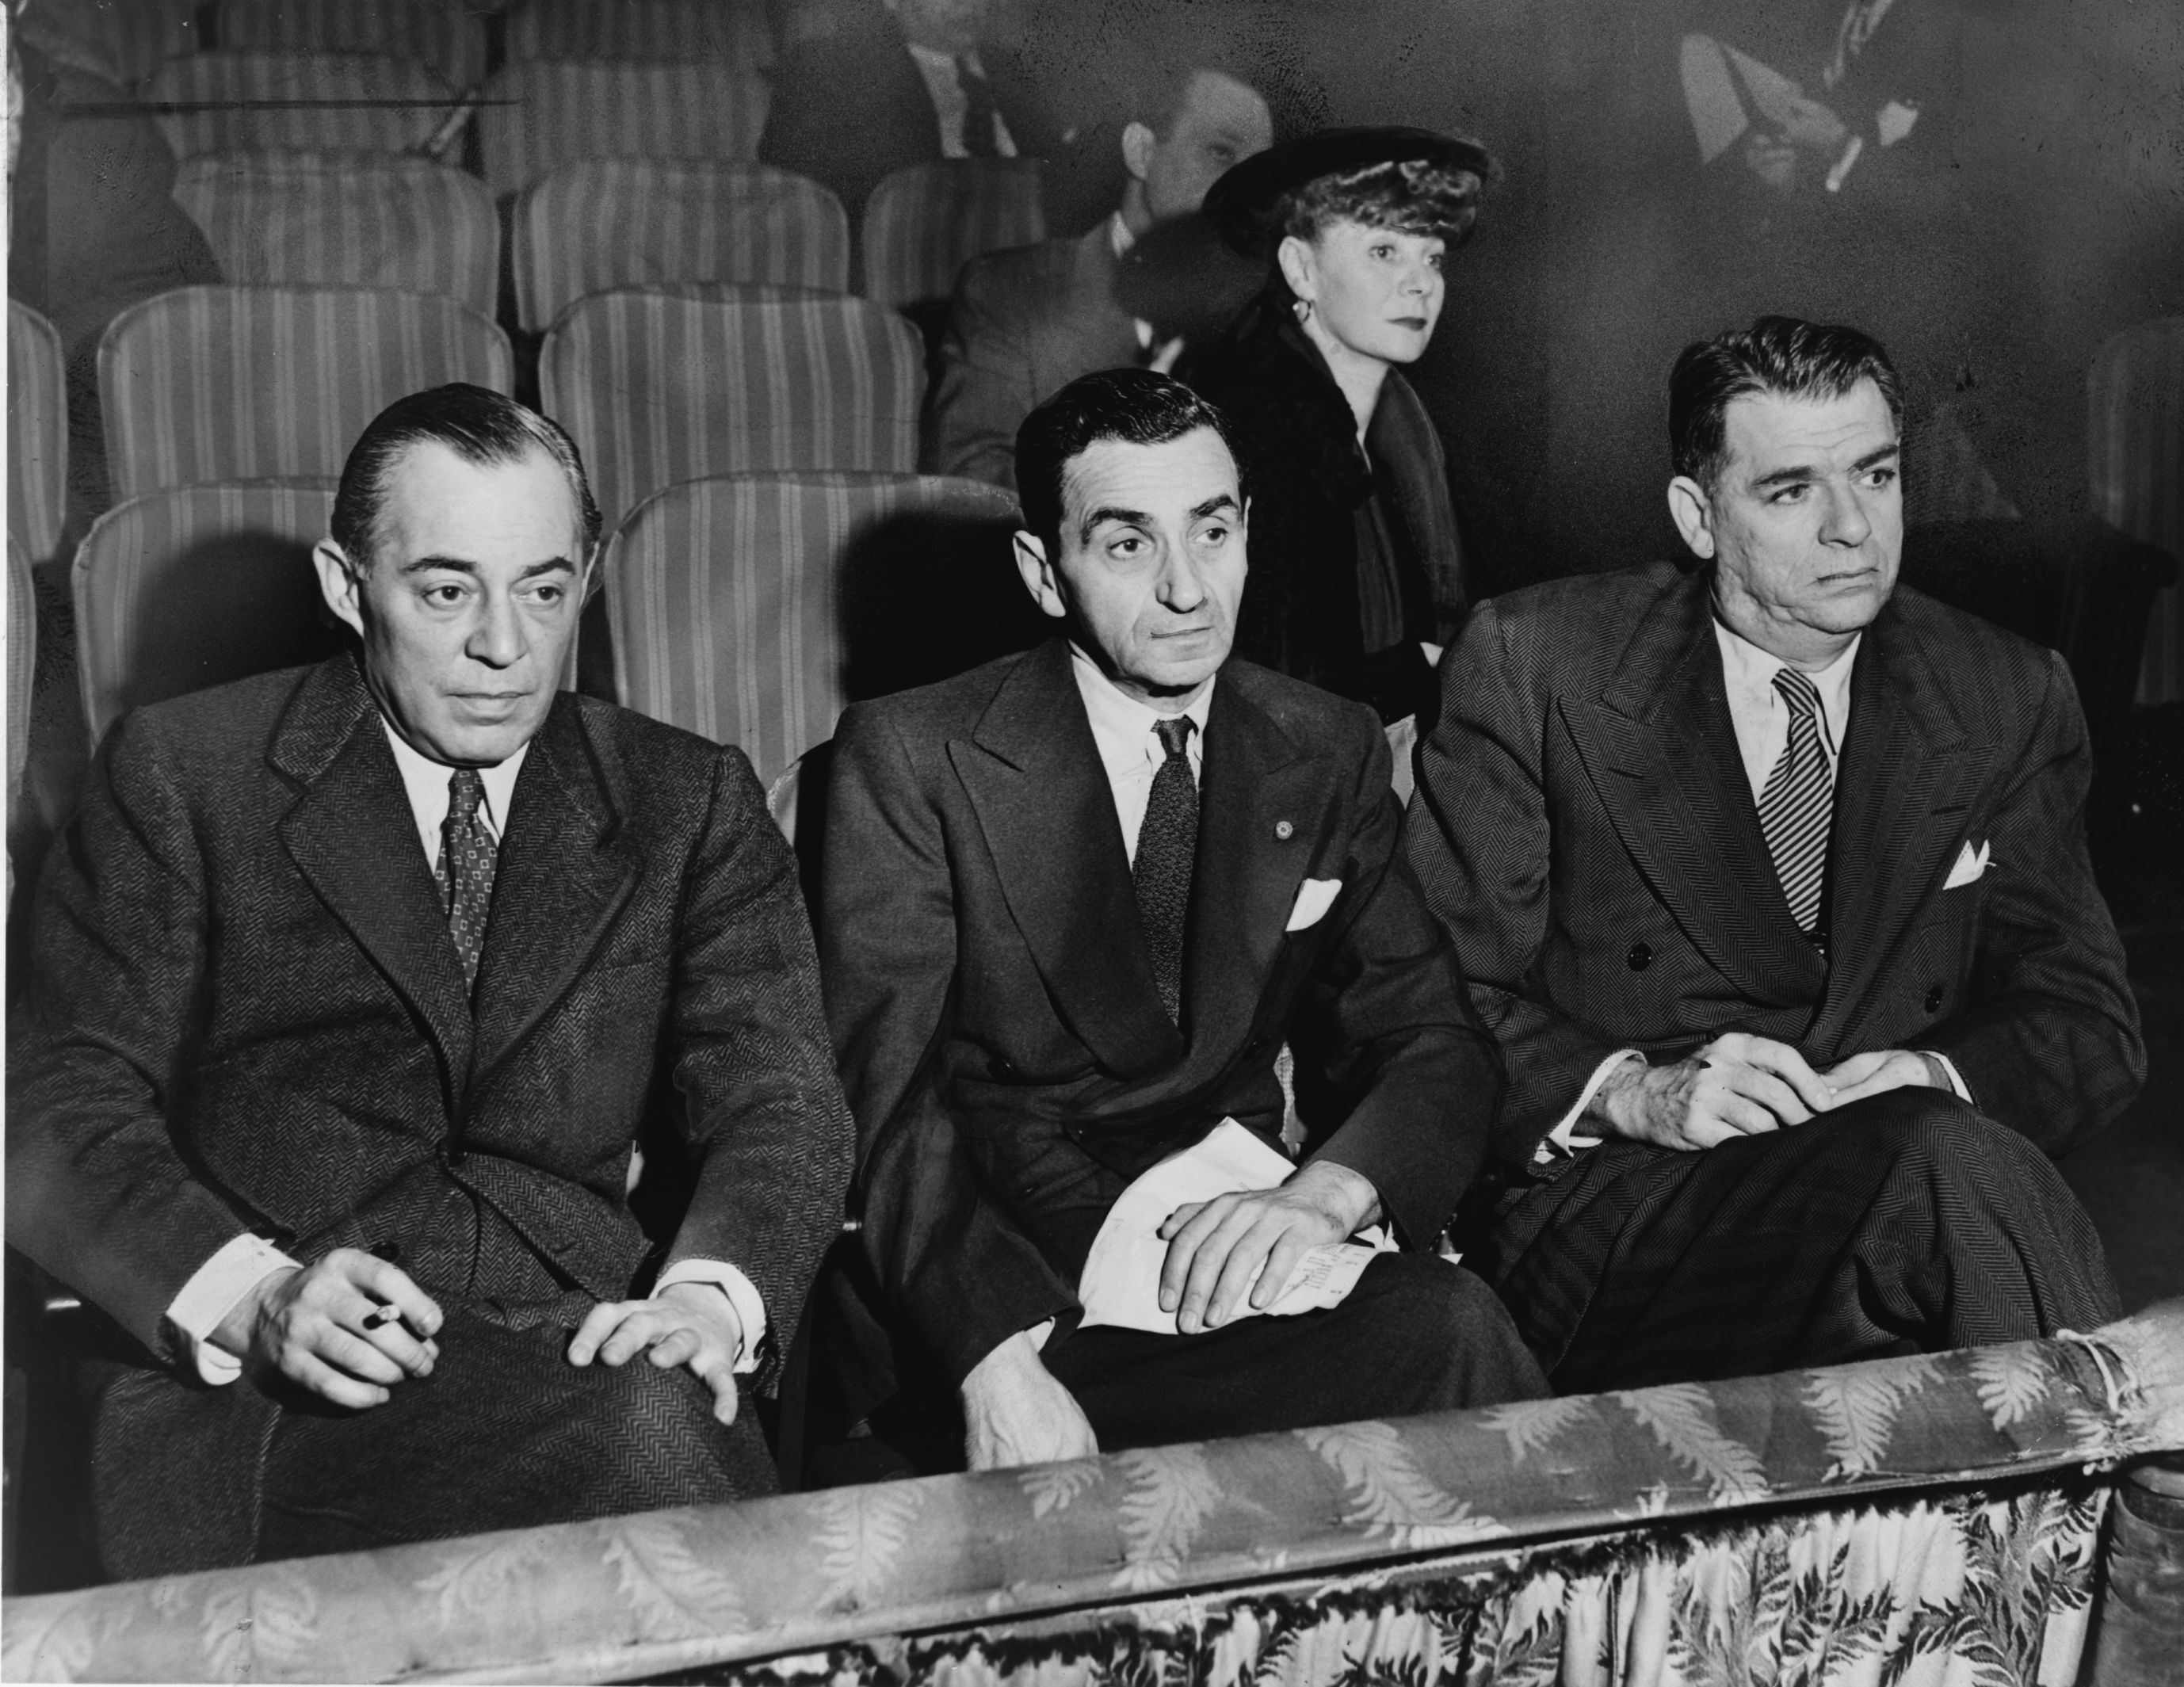 Musical creatives Rodgers (left) and Hammerstein (right), here observingauditions at the St. James Theatre in 1948, created some of the most popular musicals of the 20th century. (Library of Congress)